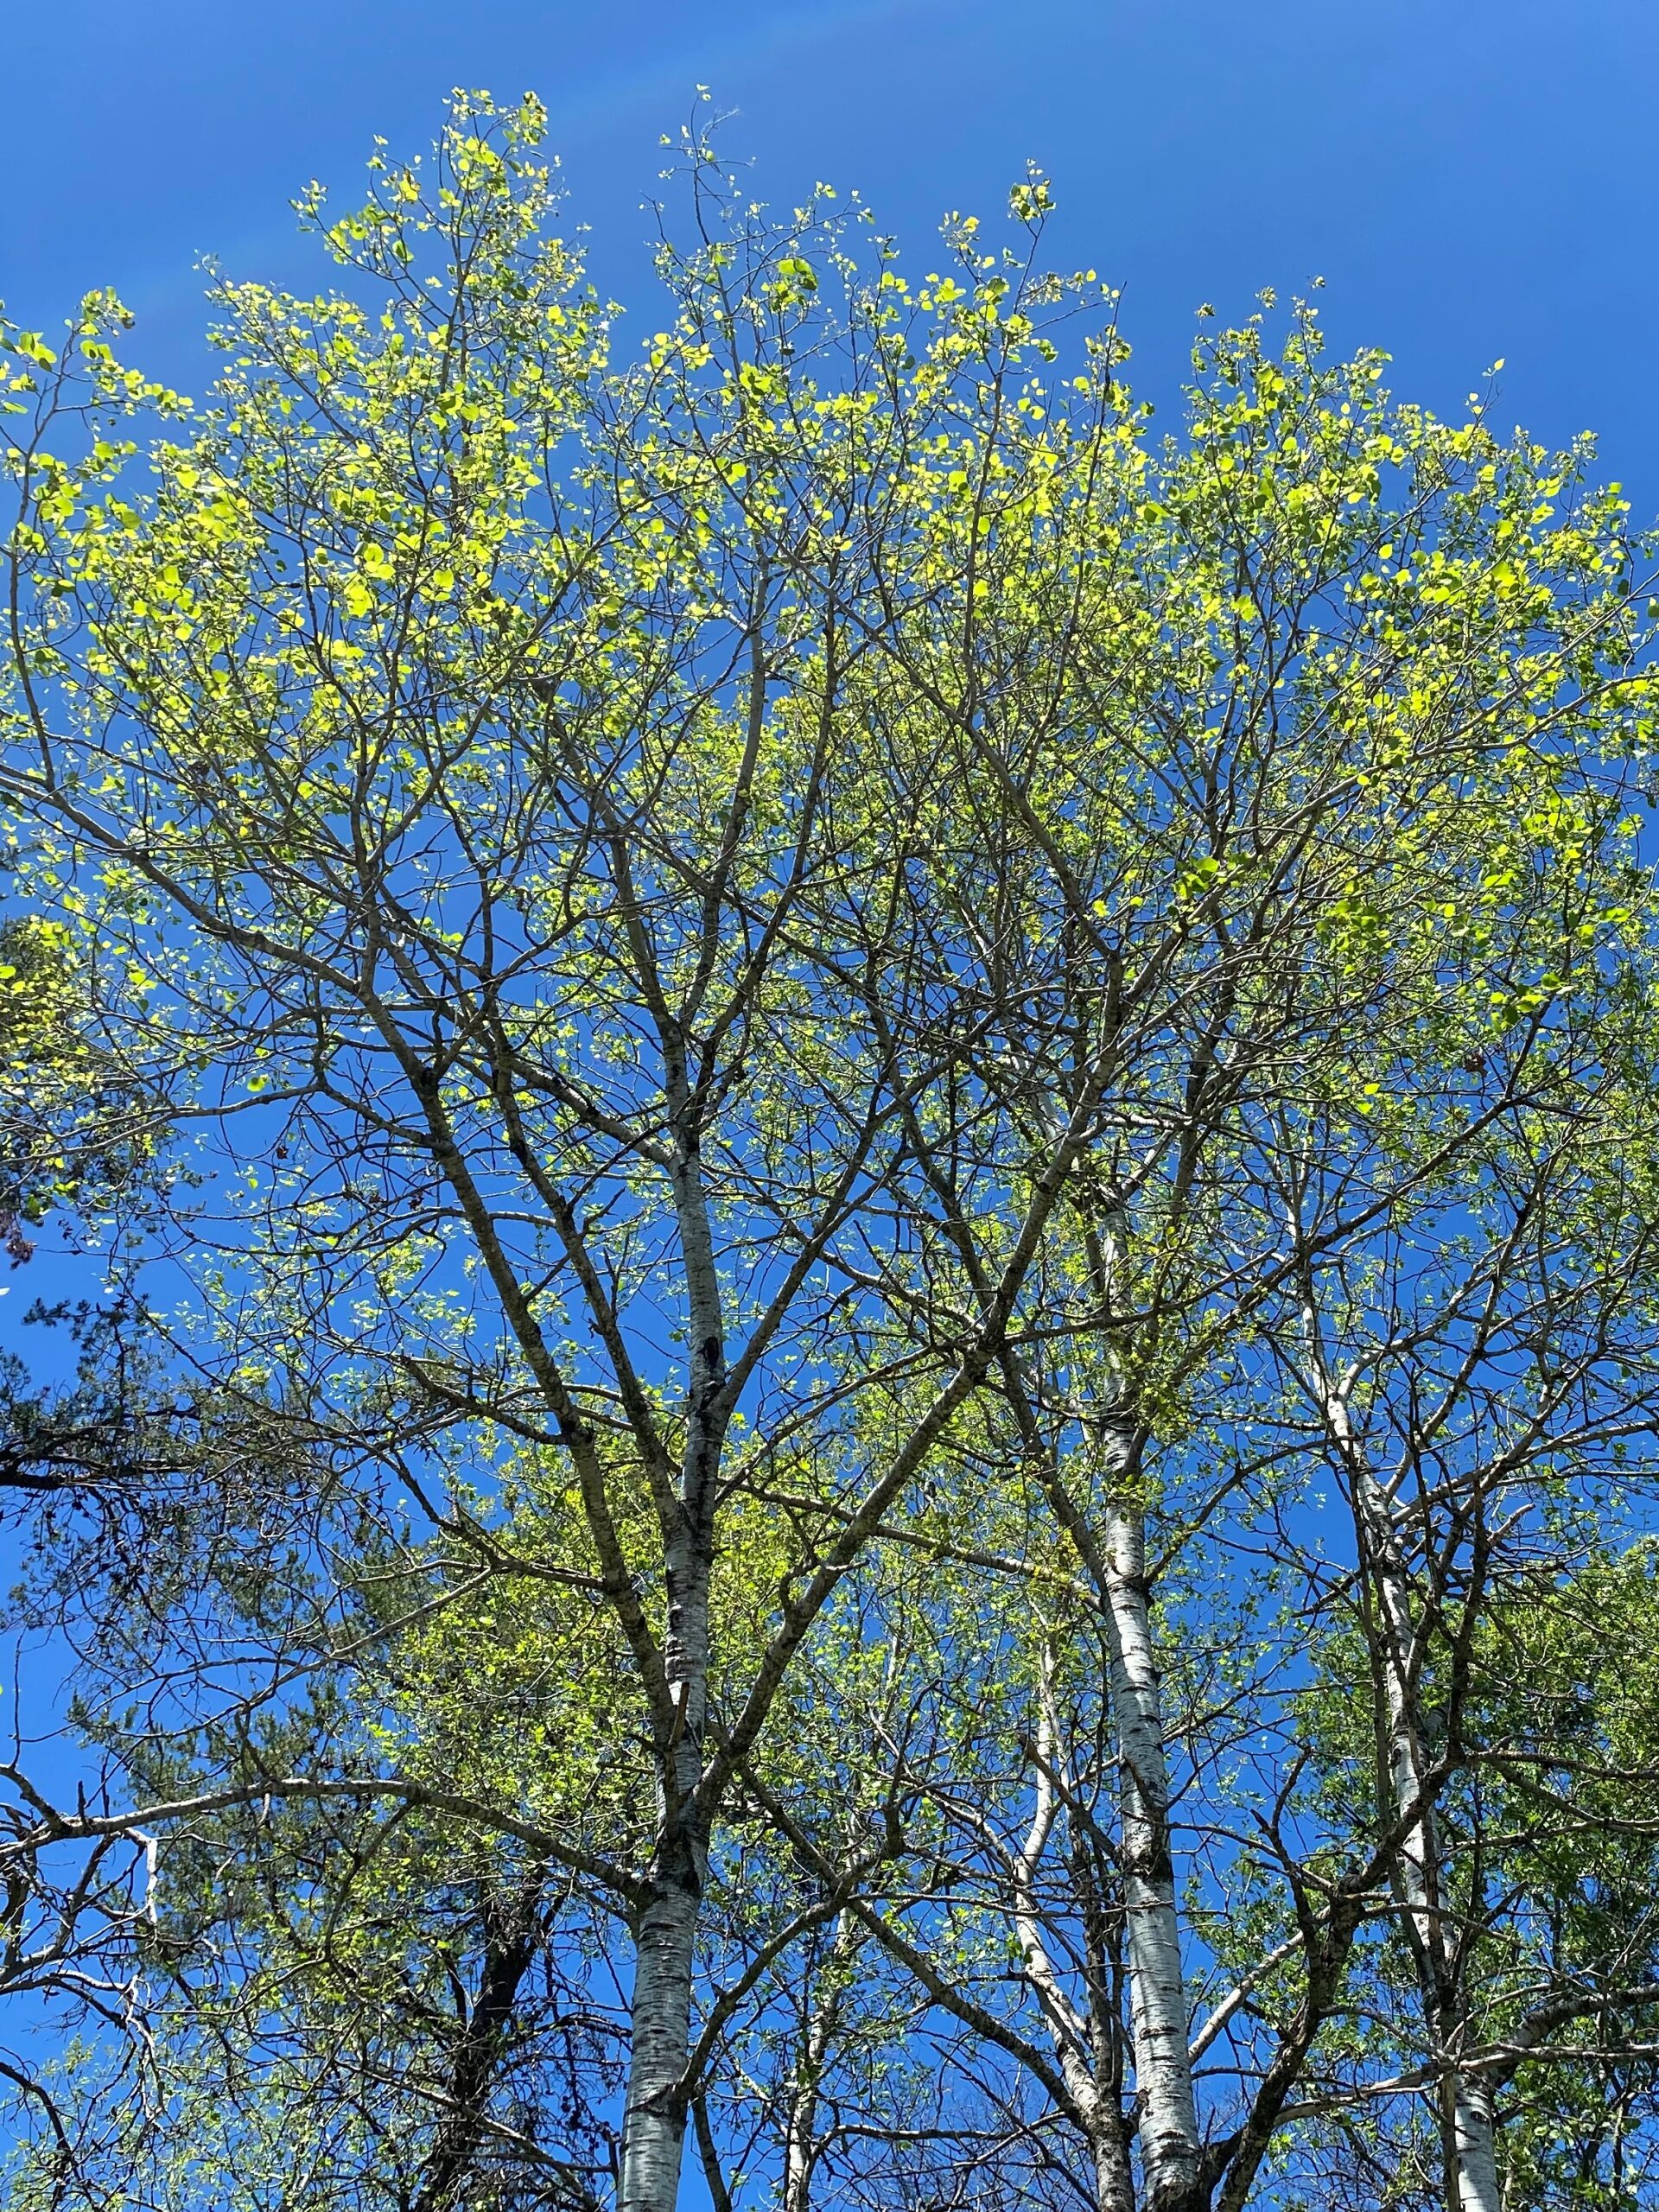 Aspen trees with leaves damaged by leaf disease..